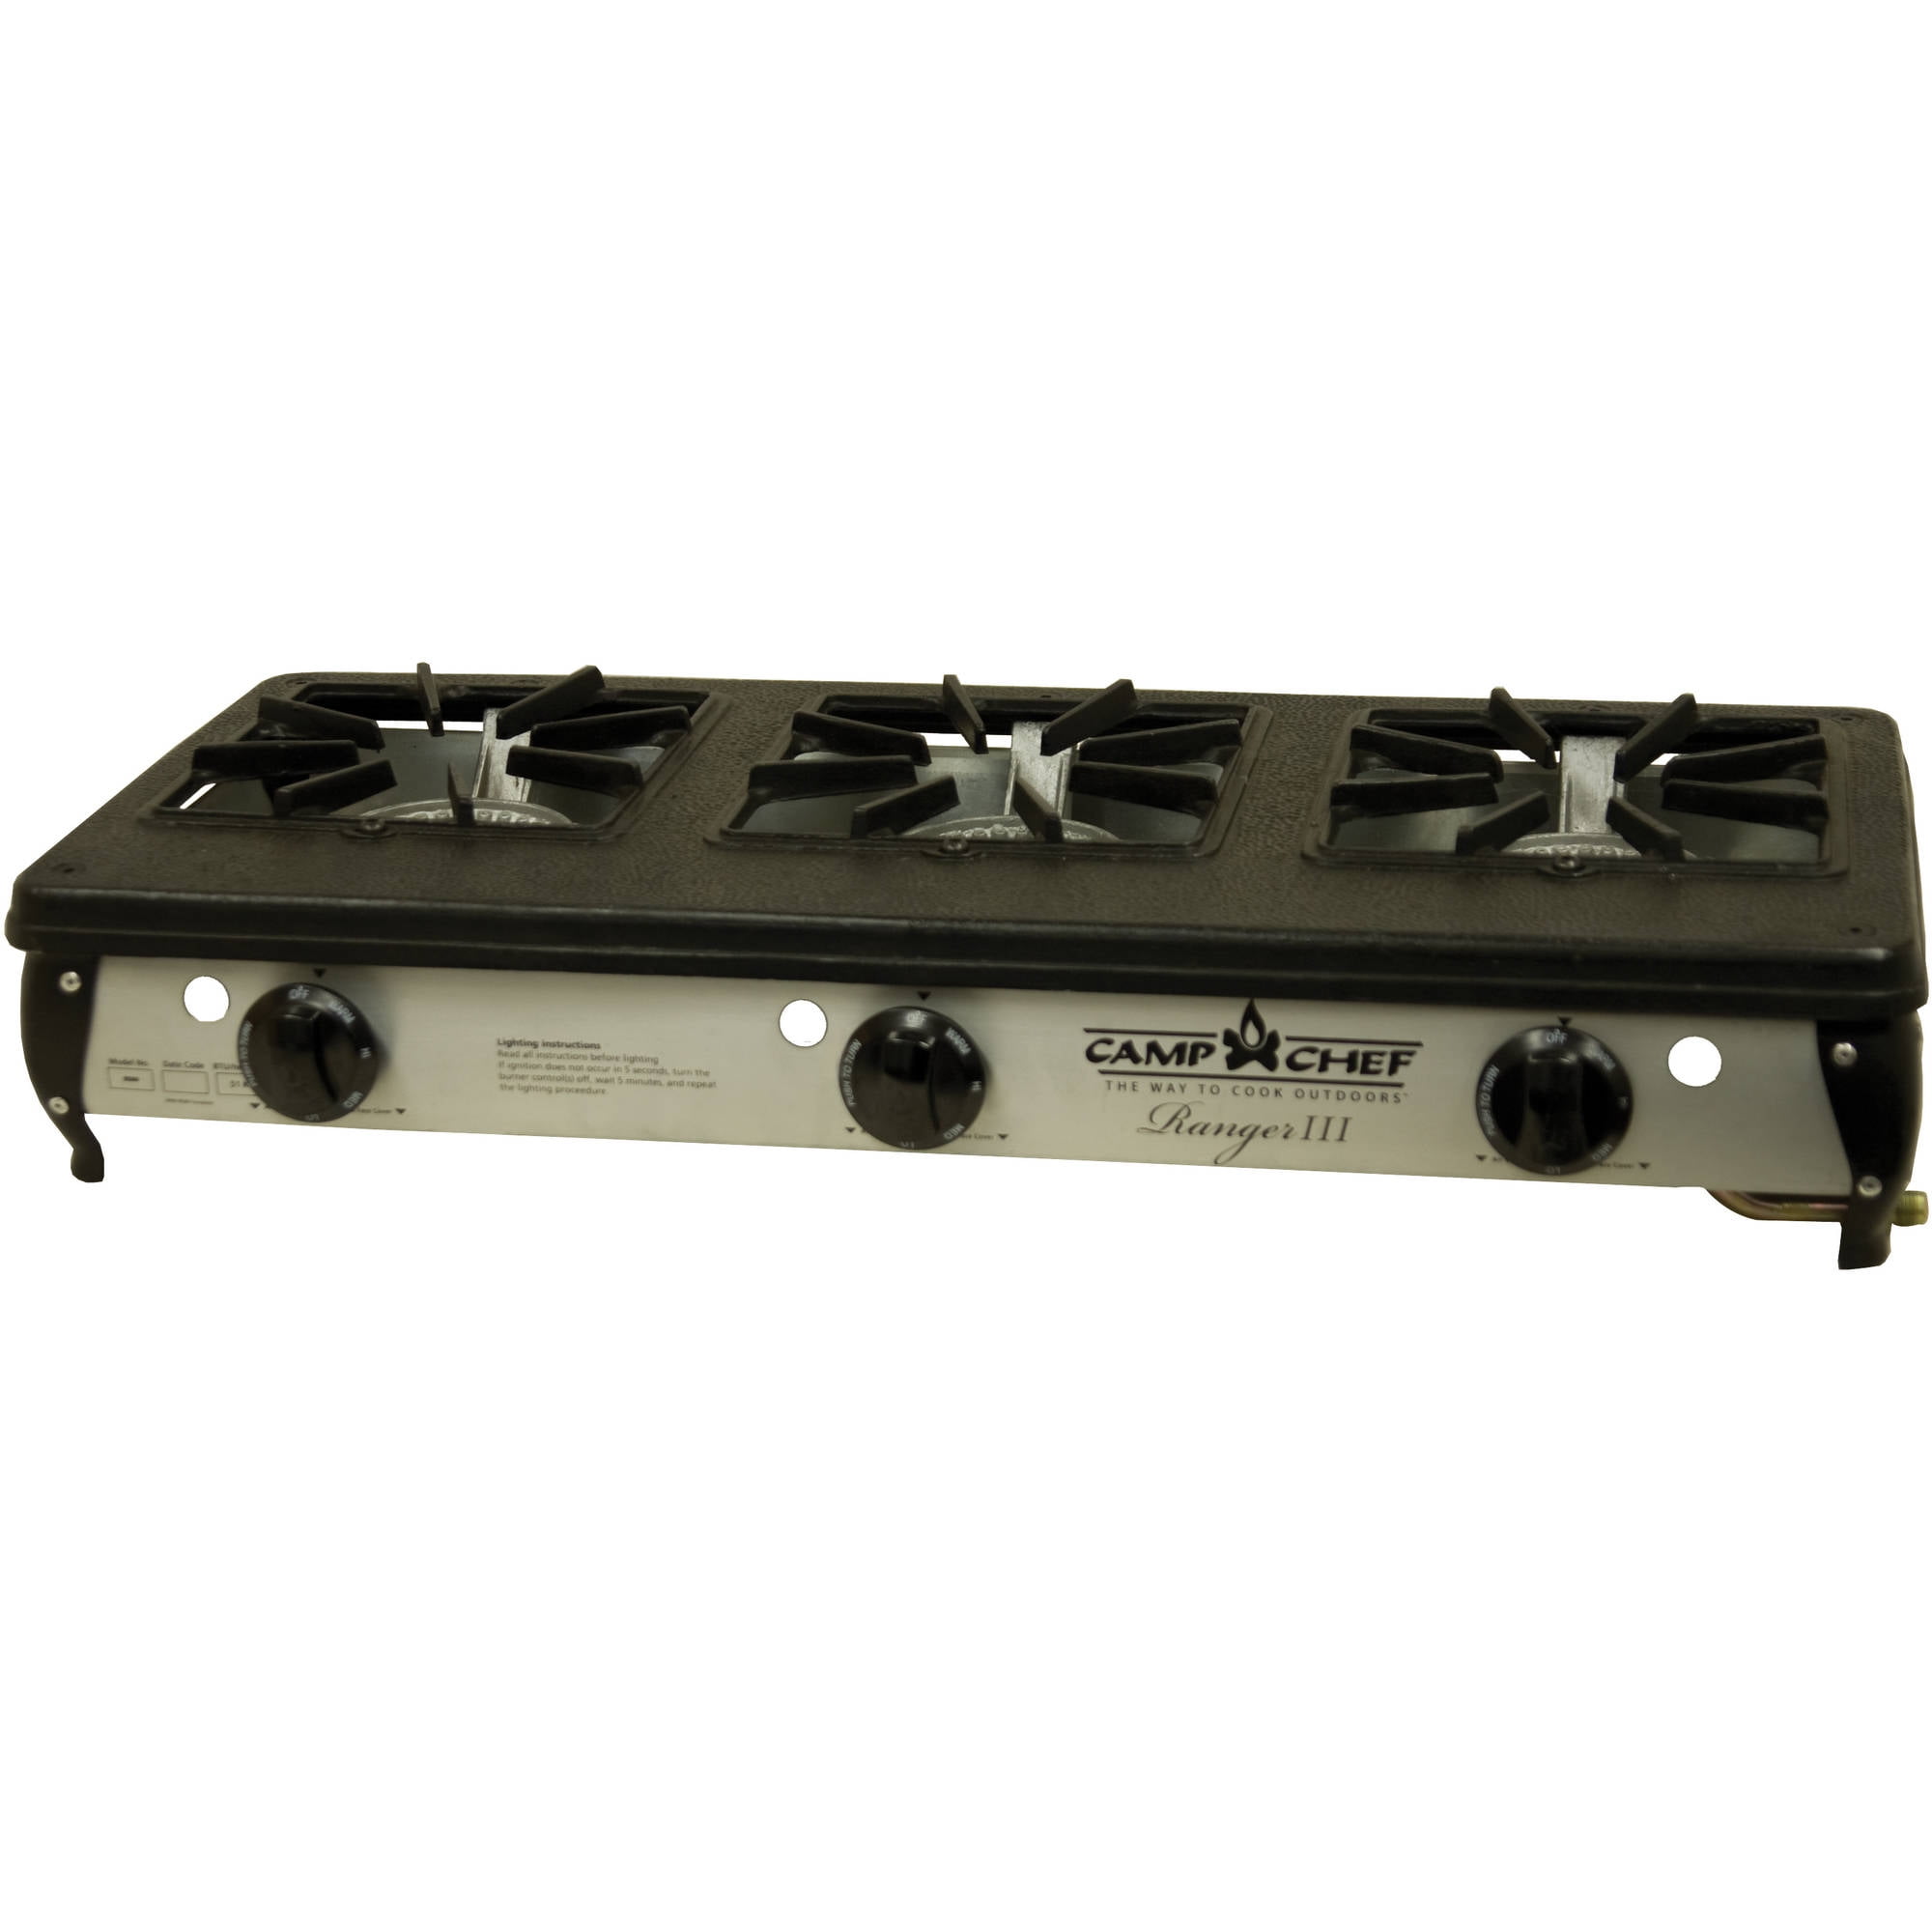 Camp Chef 3 Burner Propane Camping, Outdoor Kitchen Gas Stove Top